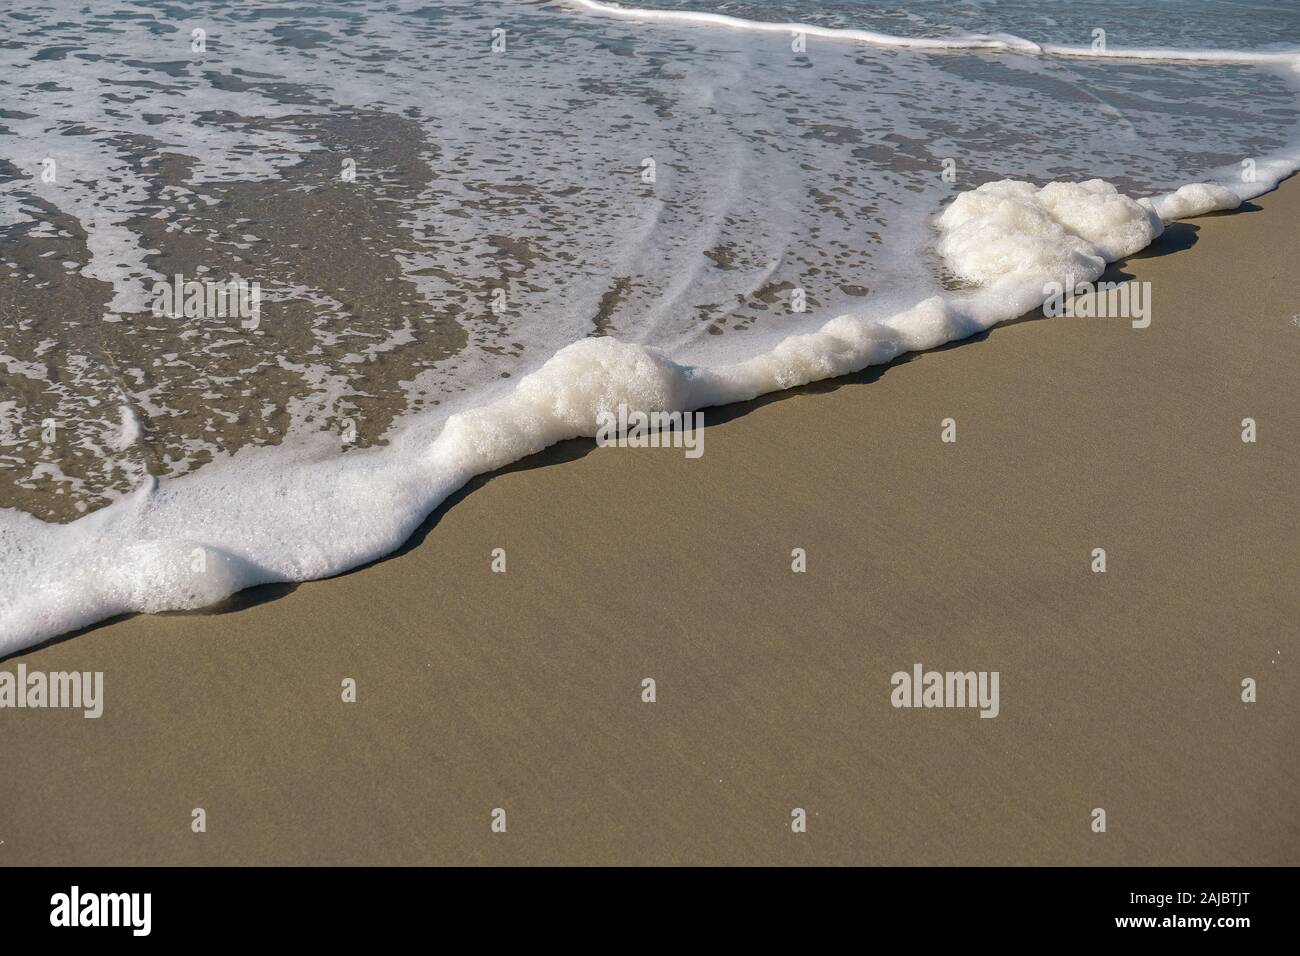 What's the funky brown sea foam washing up along the O.C. coast